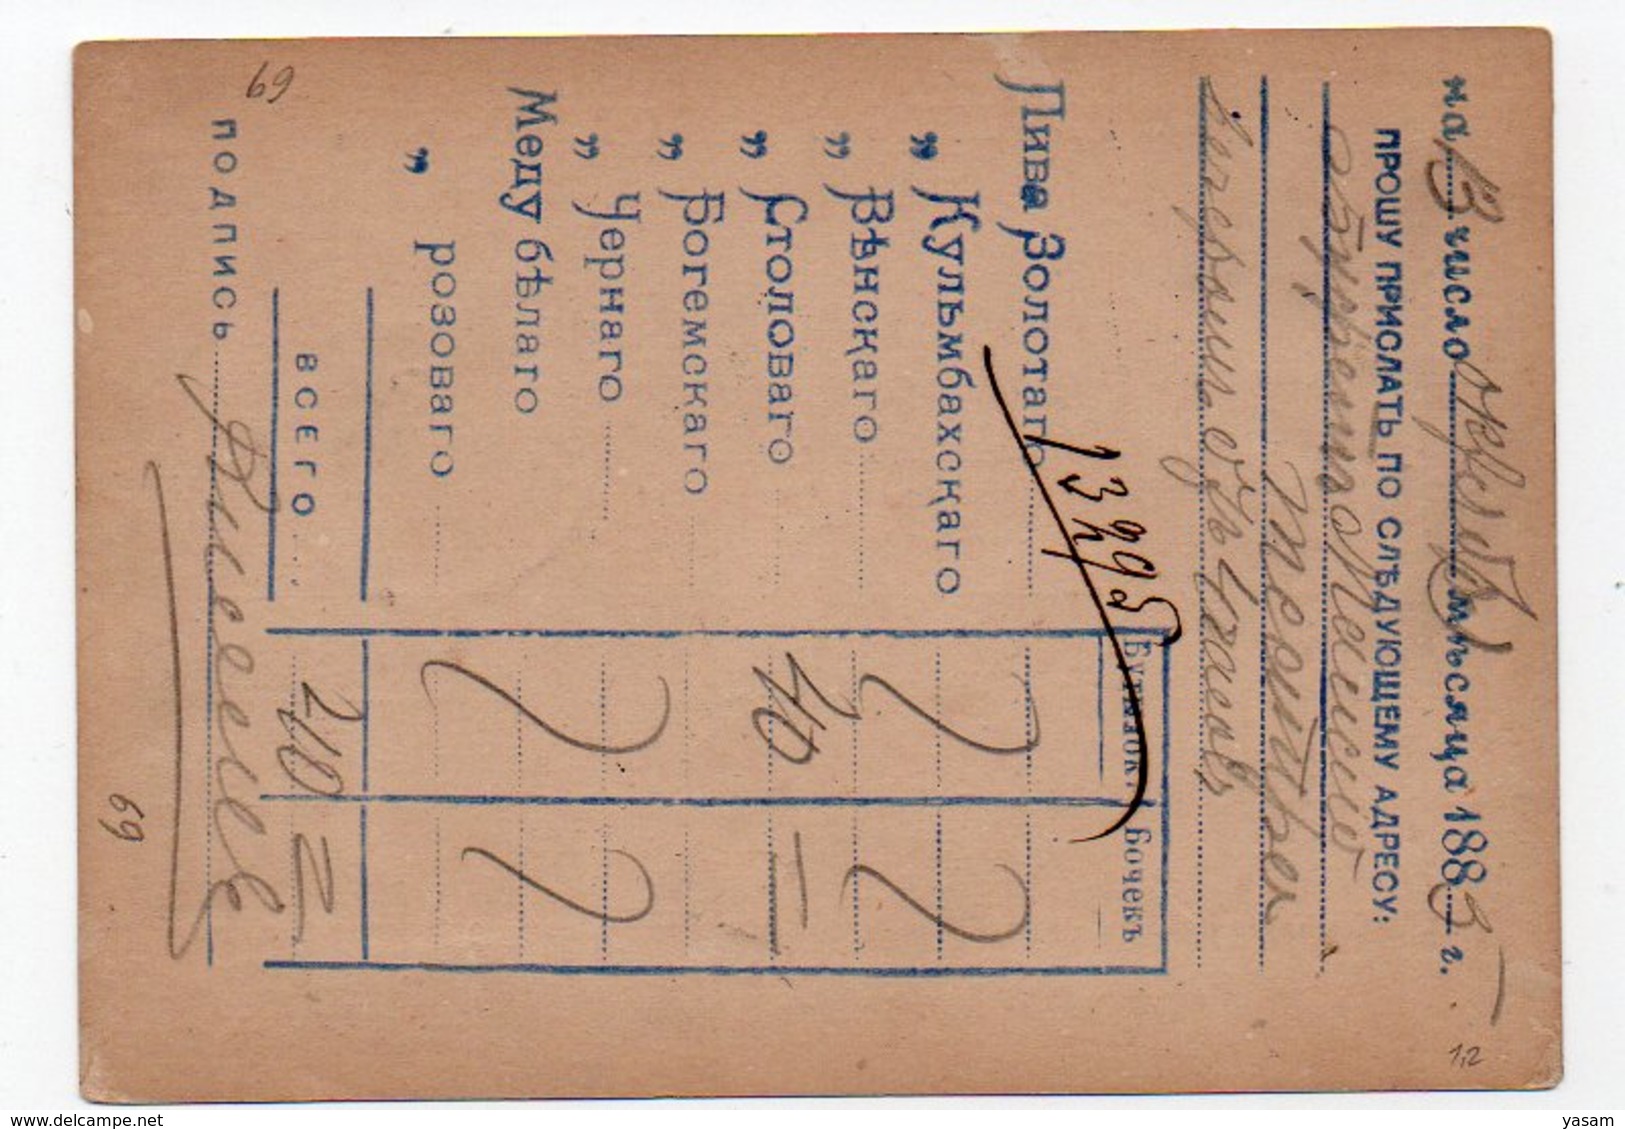 Russia. 1885. 3k Postal Stationary Card Sent To Moscow Beer Plant "Moskov Bavaria" With Order For Beer. - Biere